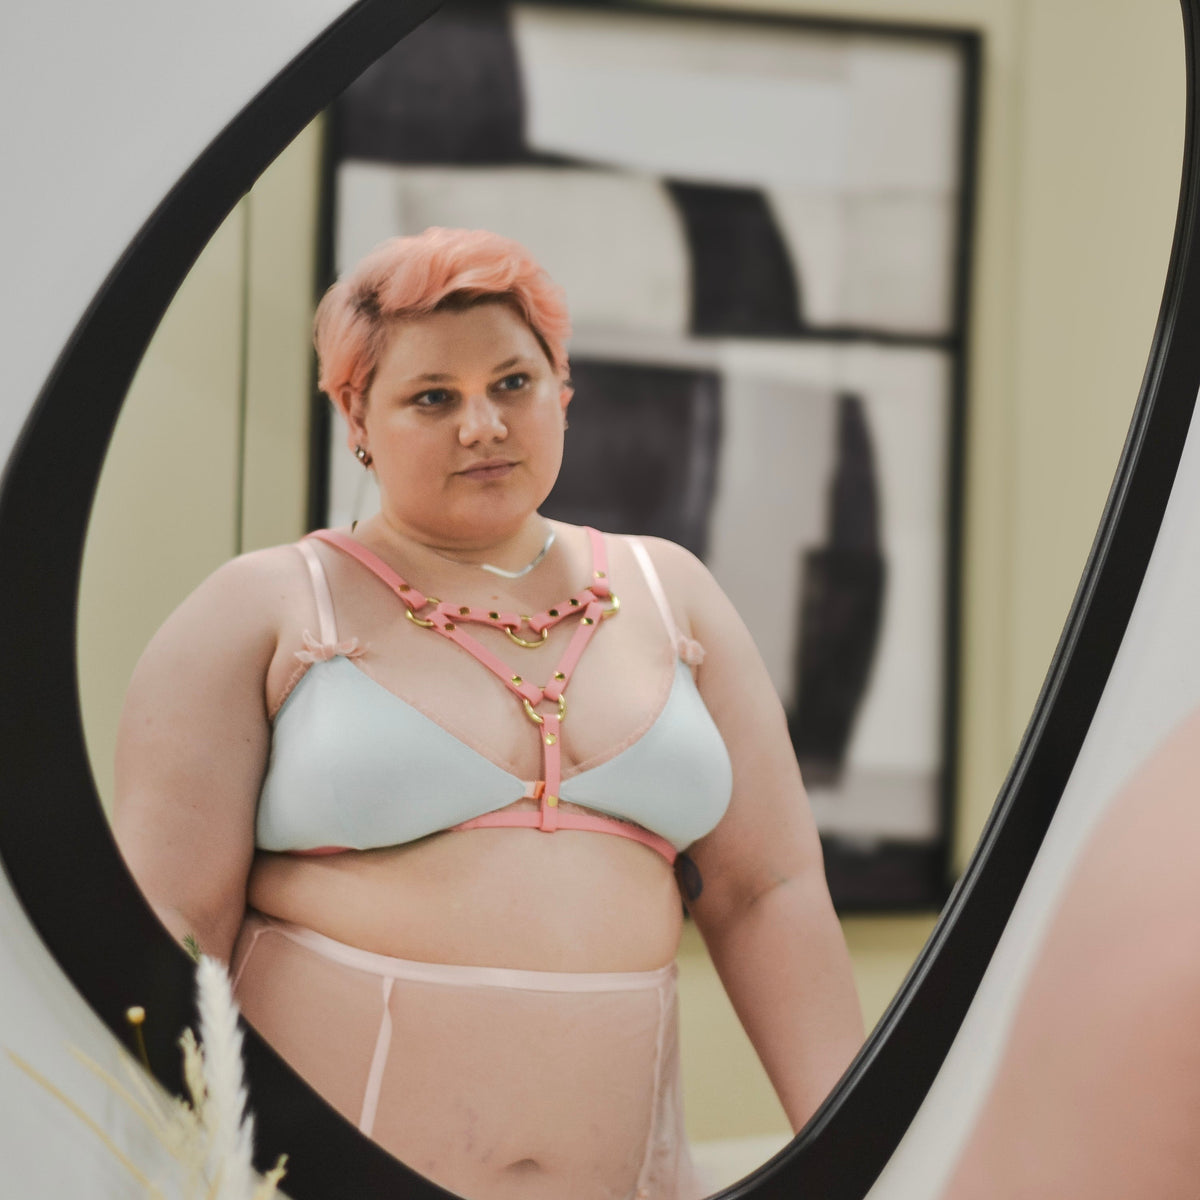 Person with cropped pastel pink hair posing wearing a pastel blue bra top and a pastel pink chest harness while looking at themselves in the mirror.